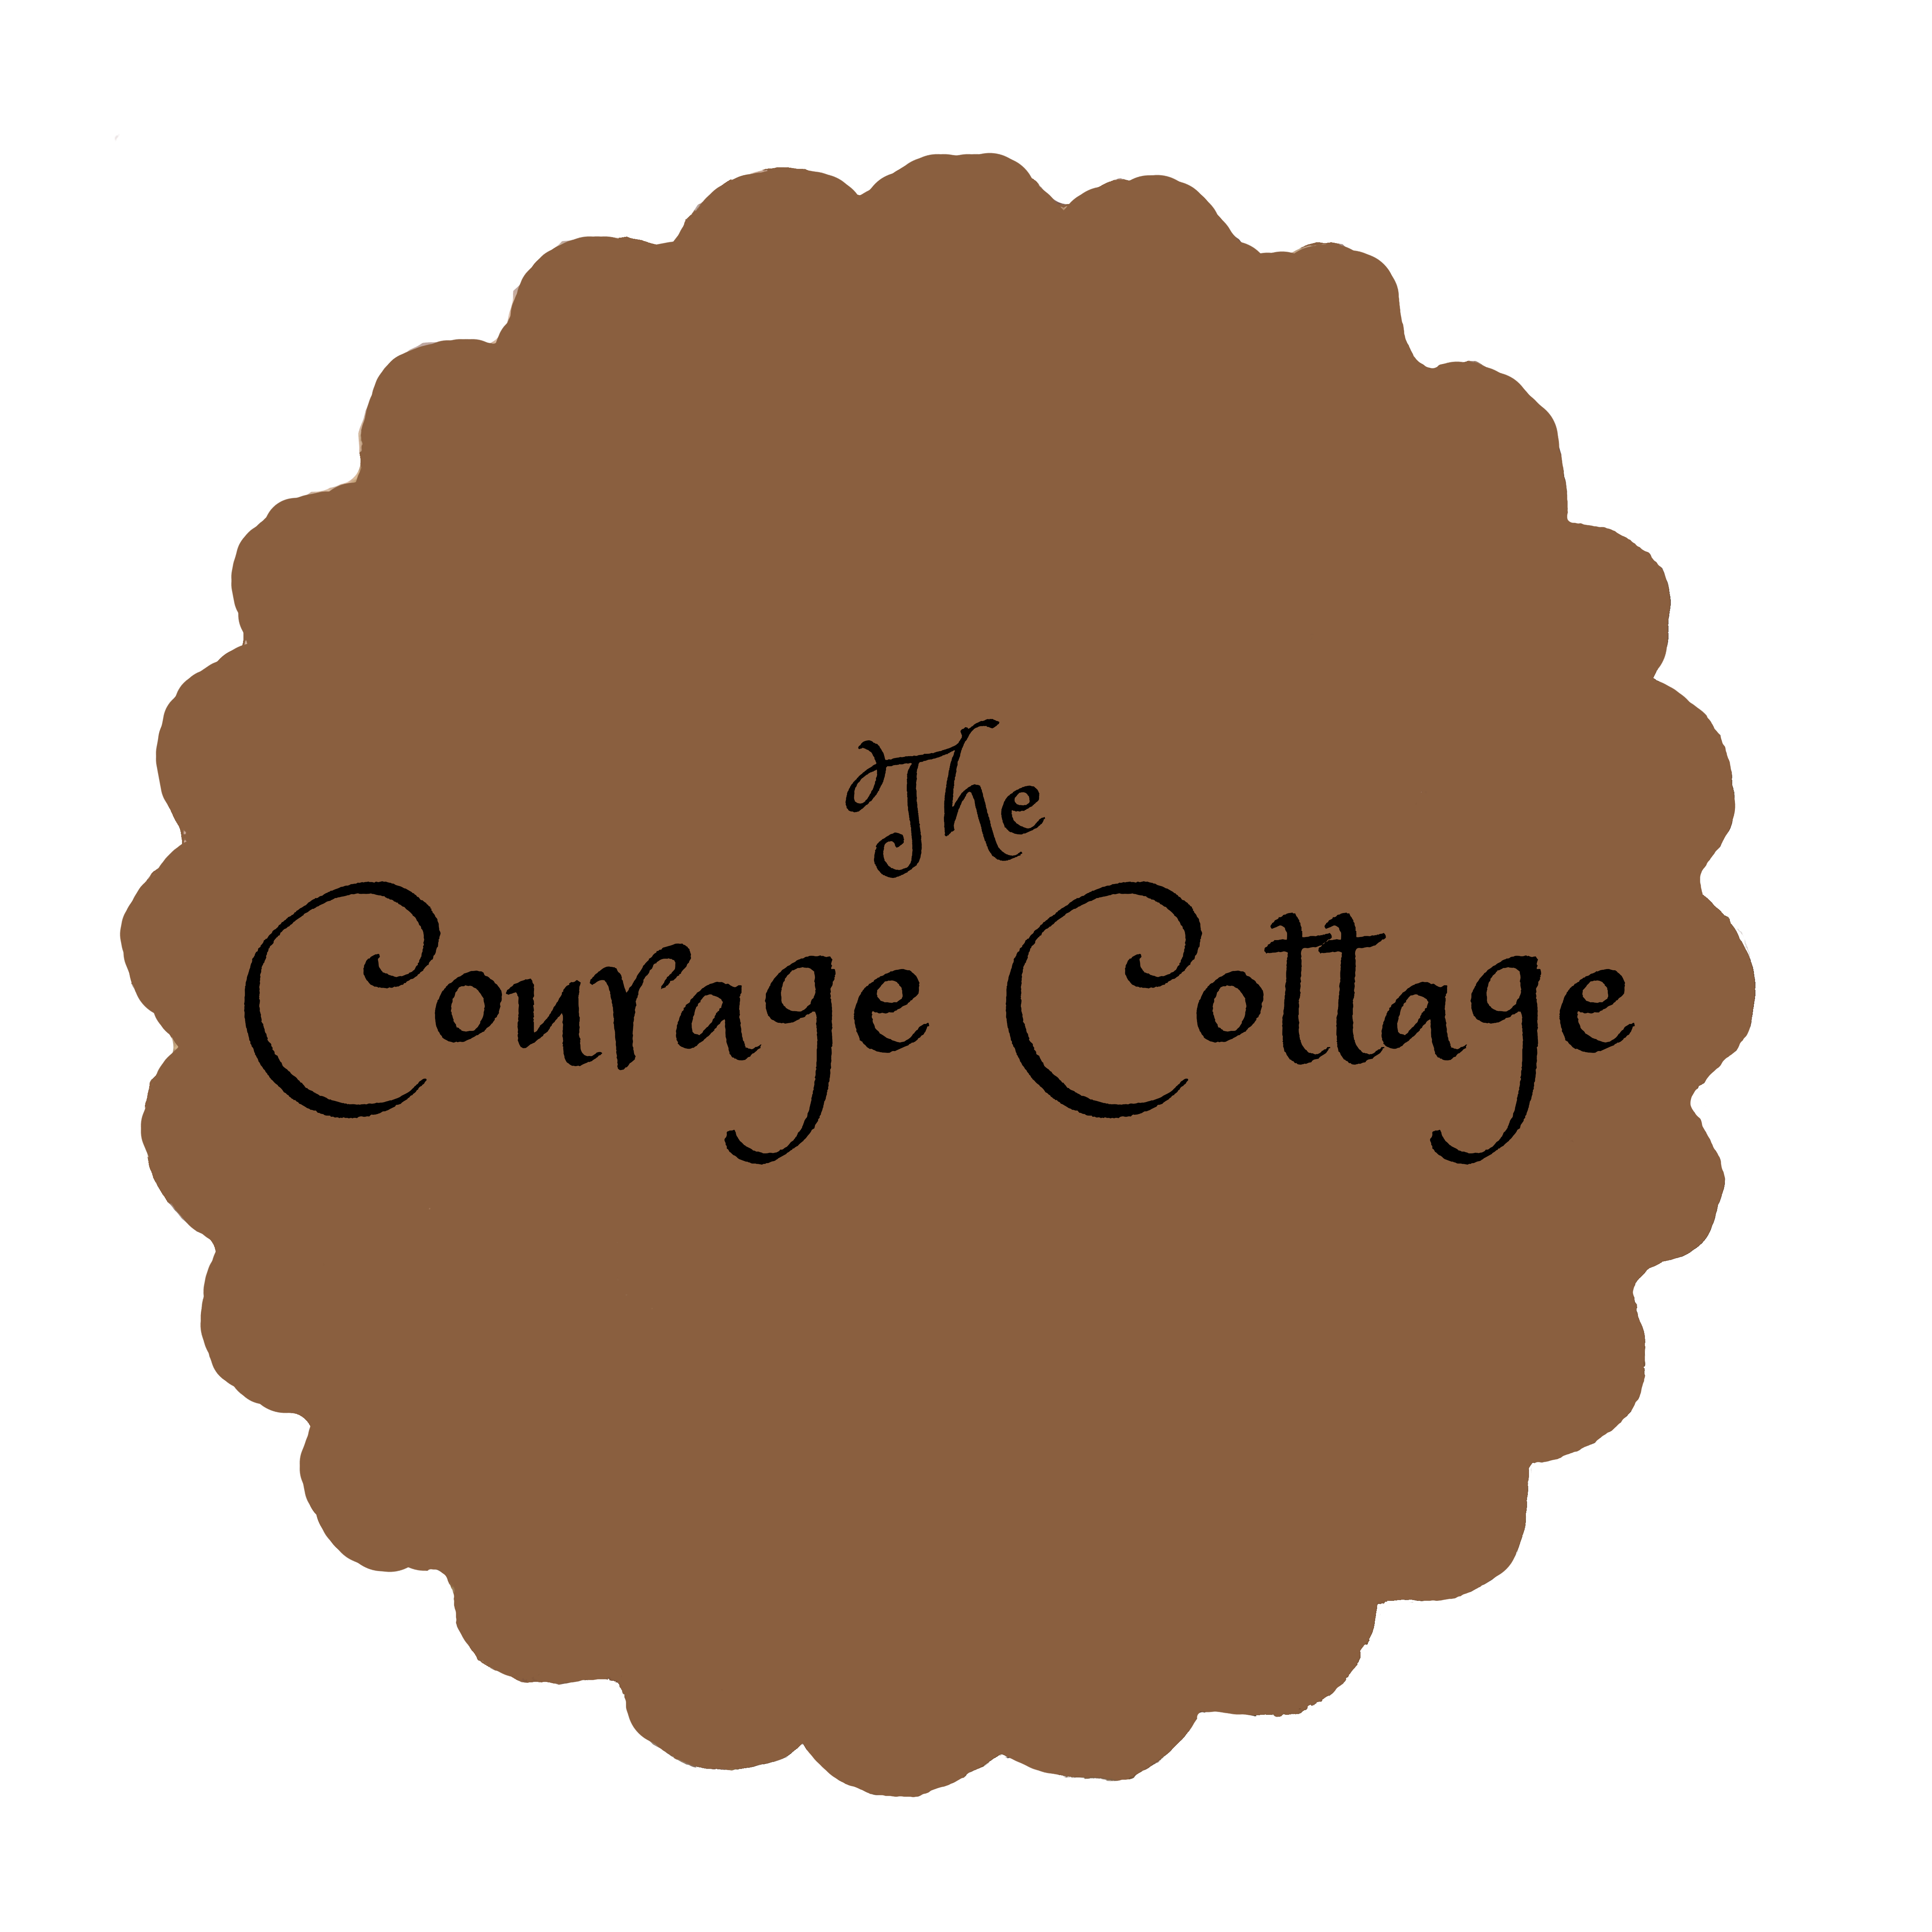 The Courage Cottage